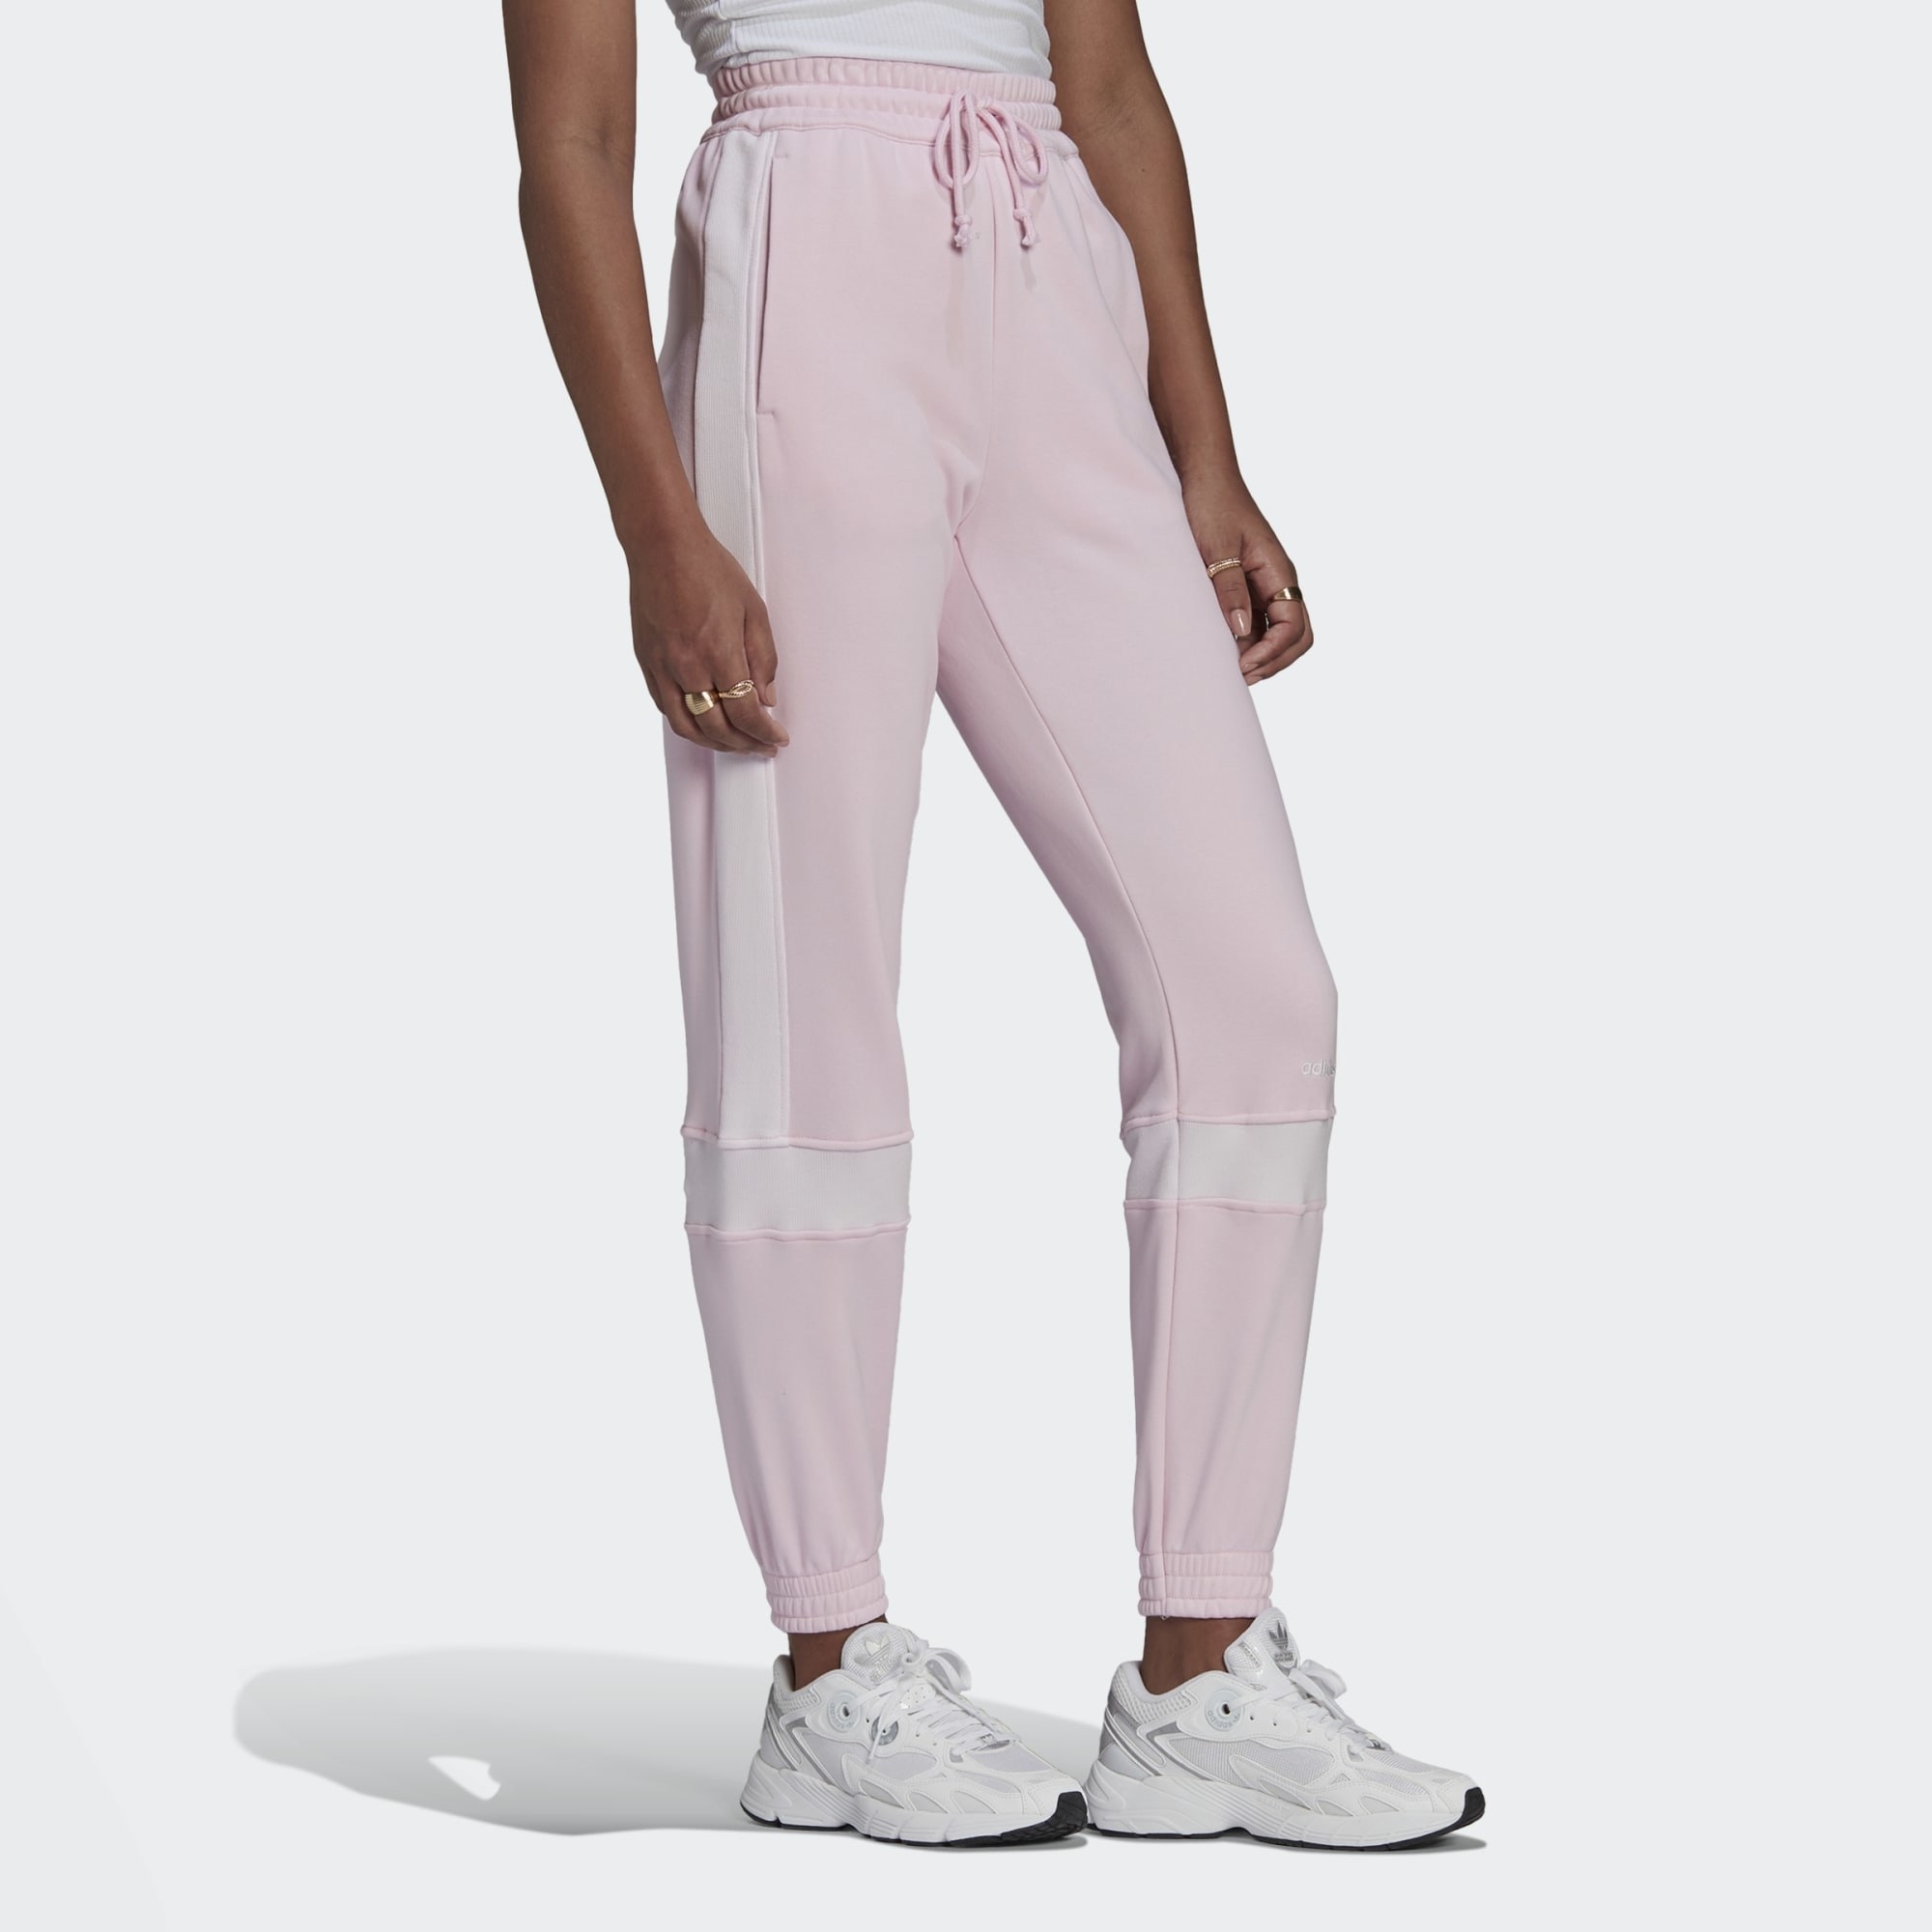 a model wearing the pink joggers white white sneakers